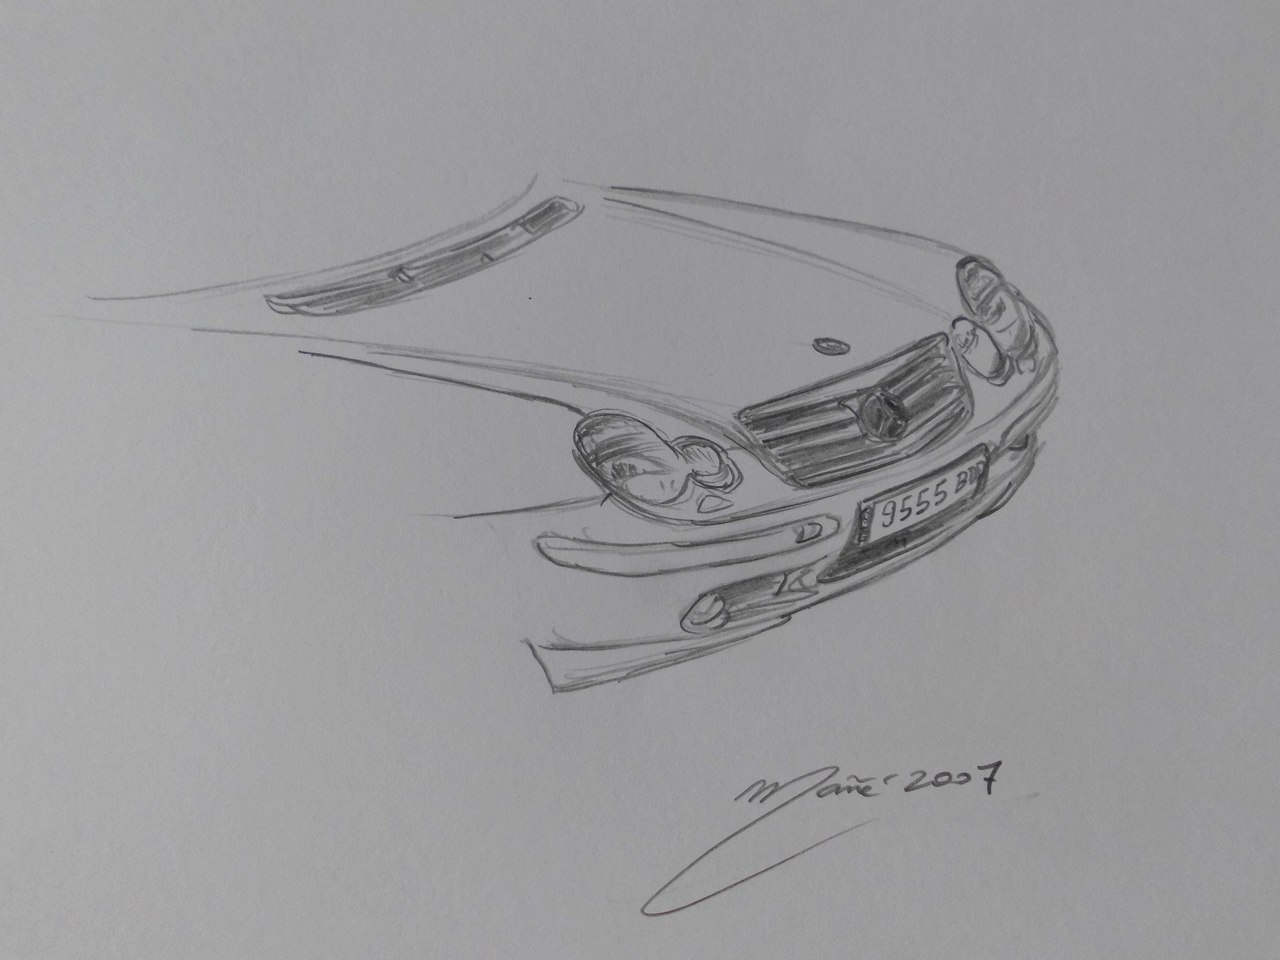 ArtStation - Realistic drawing of Mercedes Benz AMG S63 - Pencils & markers.